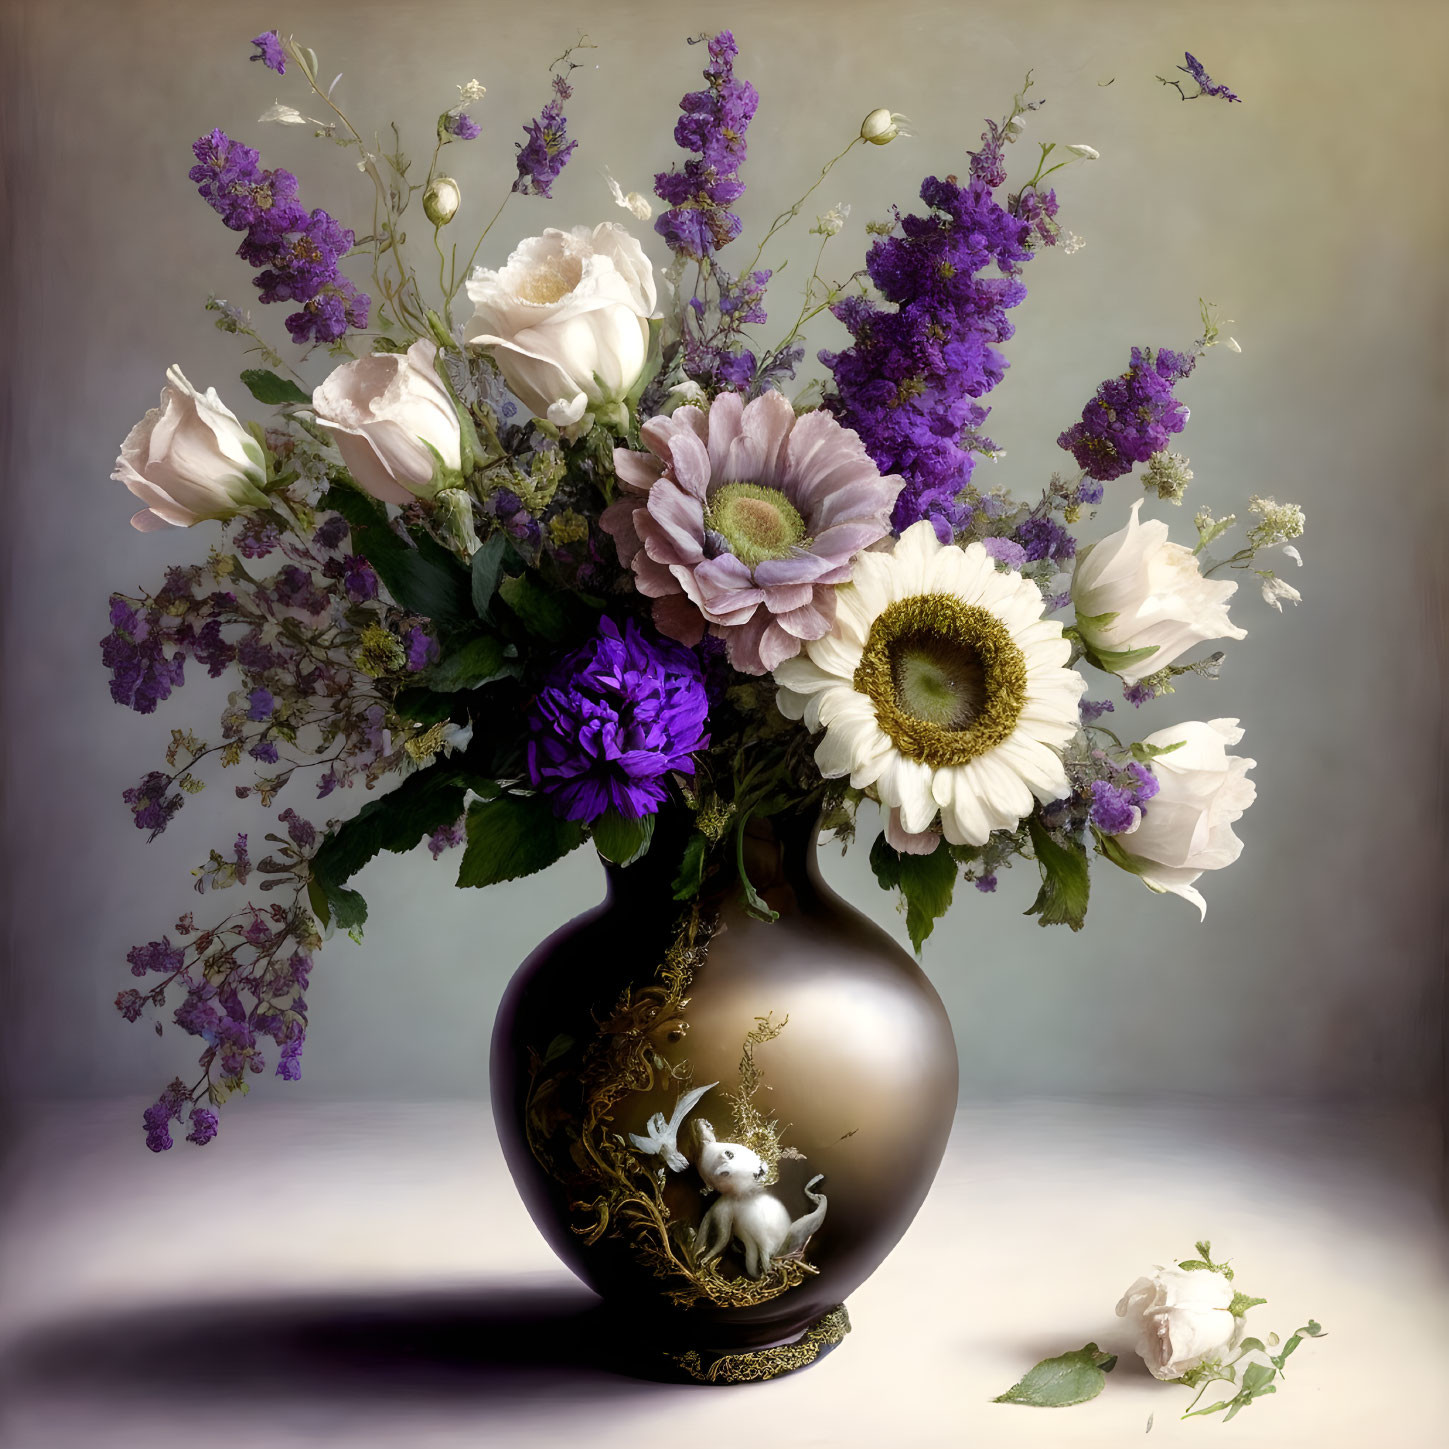  bouquet of flowers in a vase